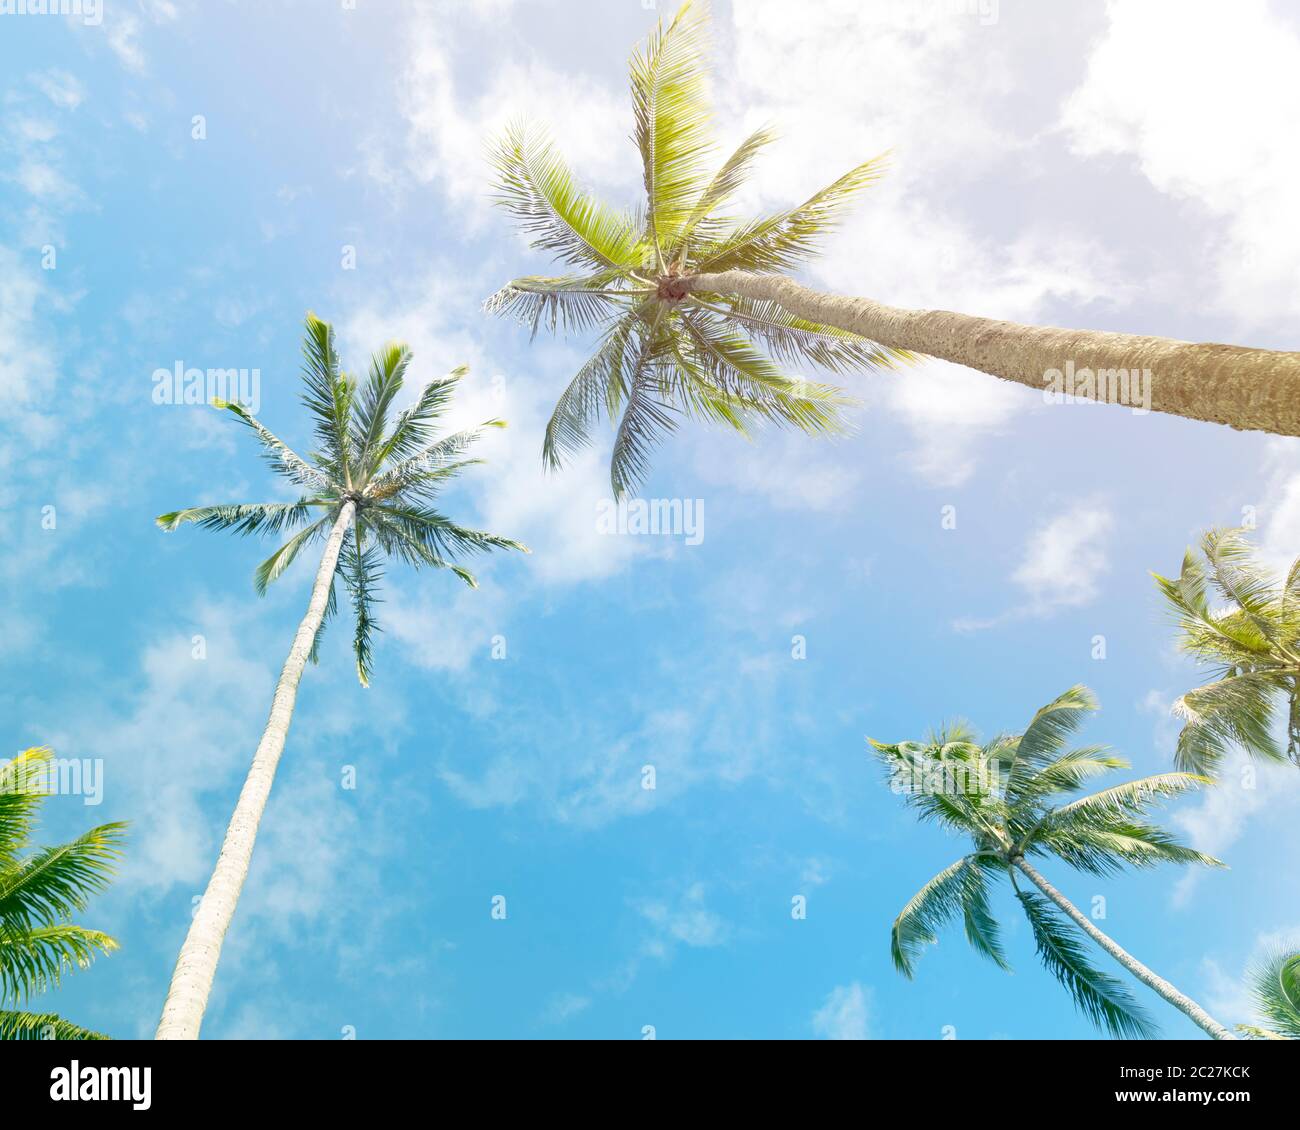 Palm trees against sunny blue sky with clouds Stock Photo